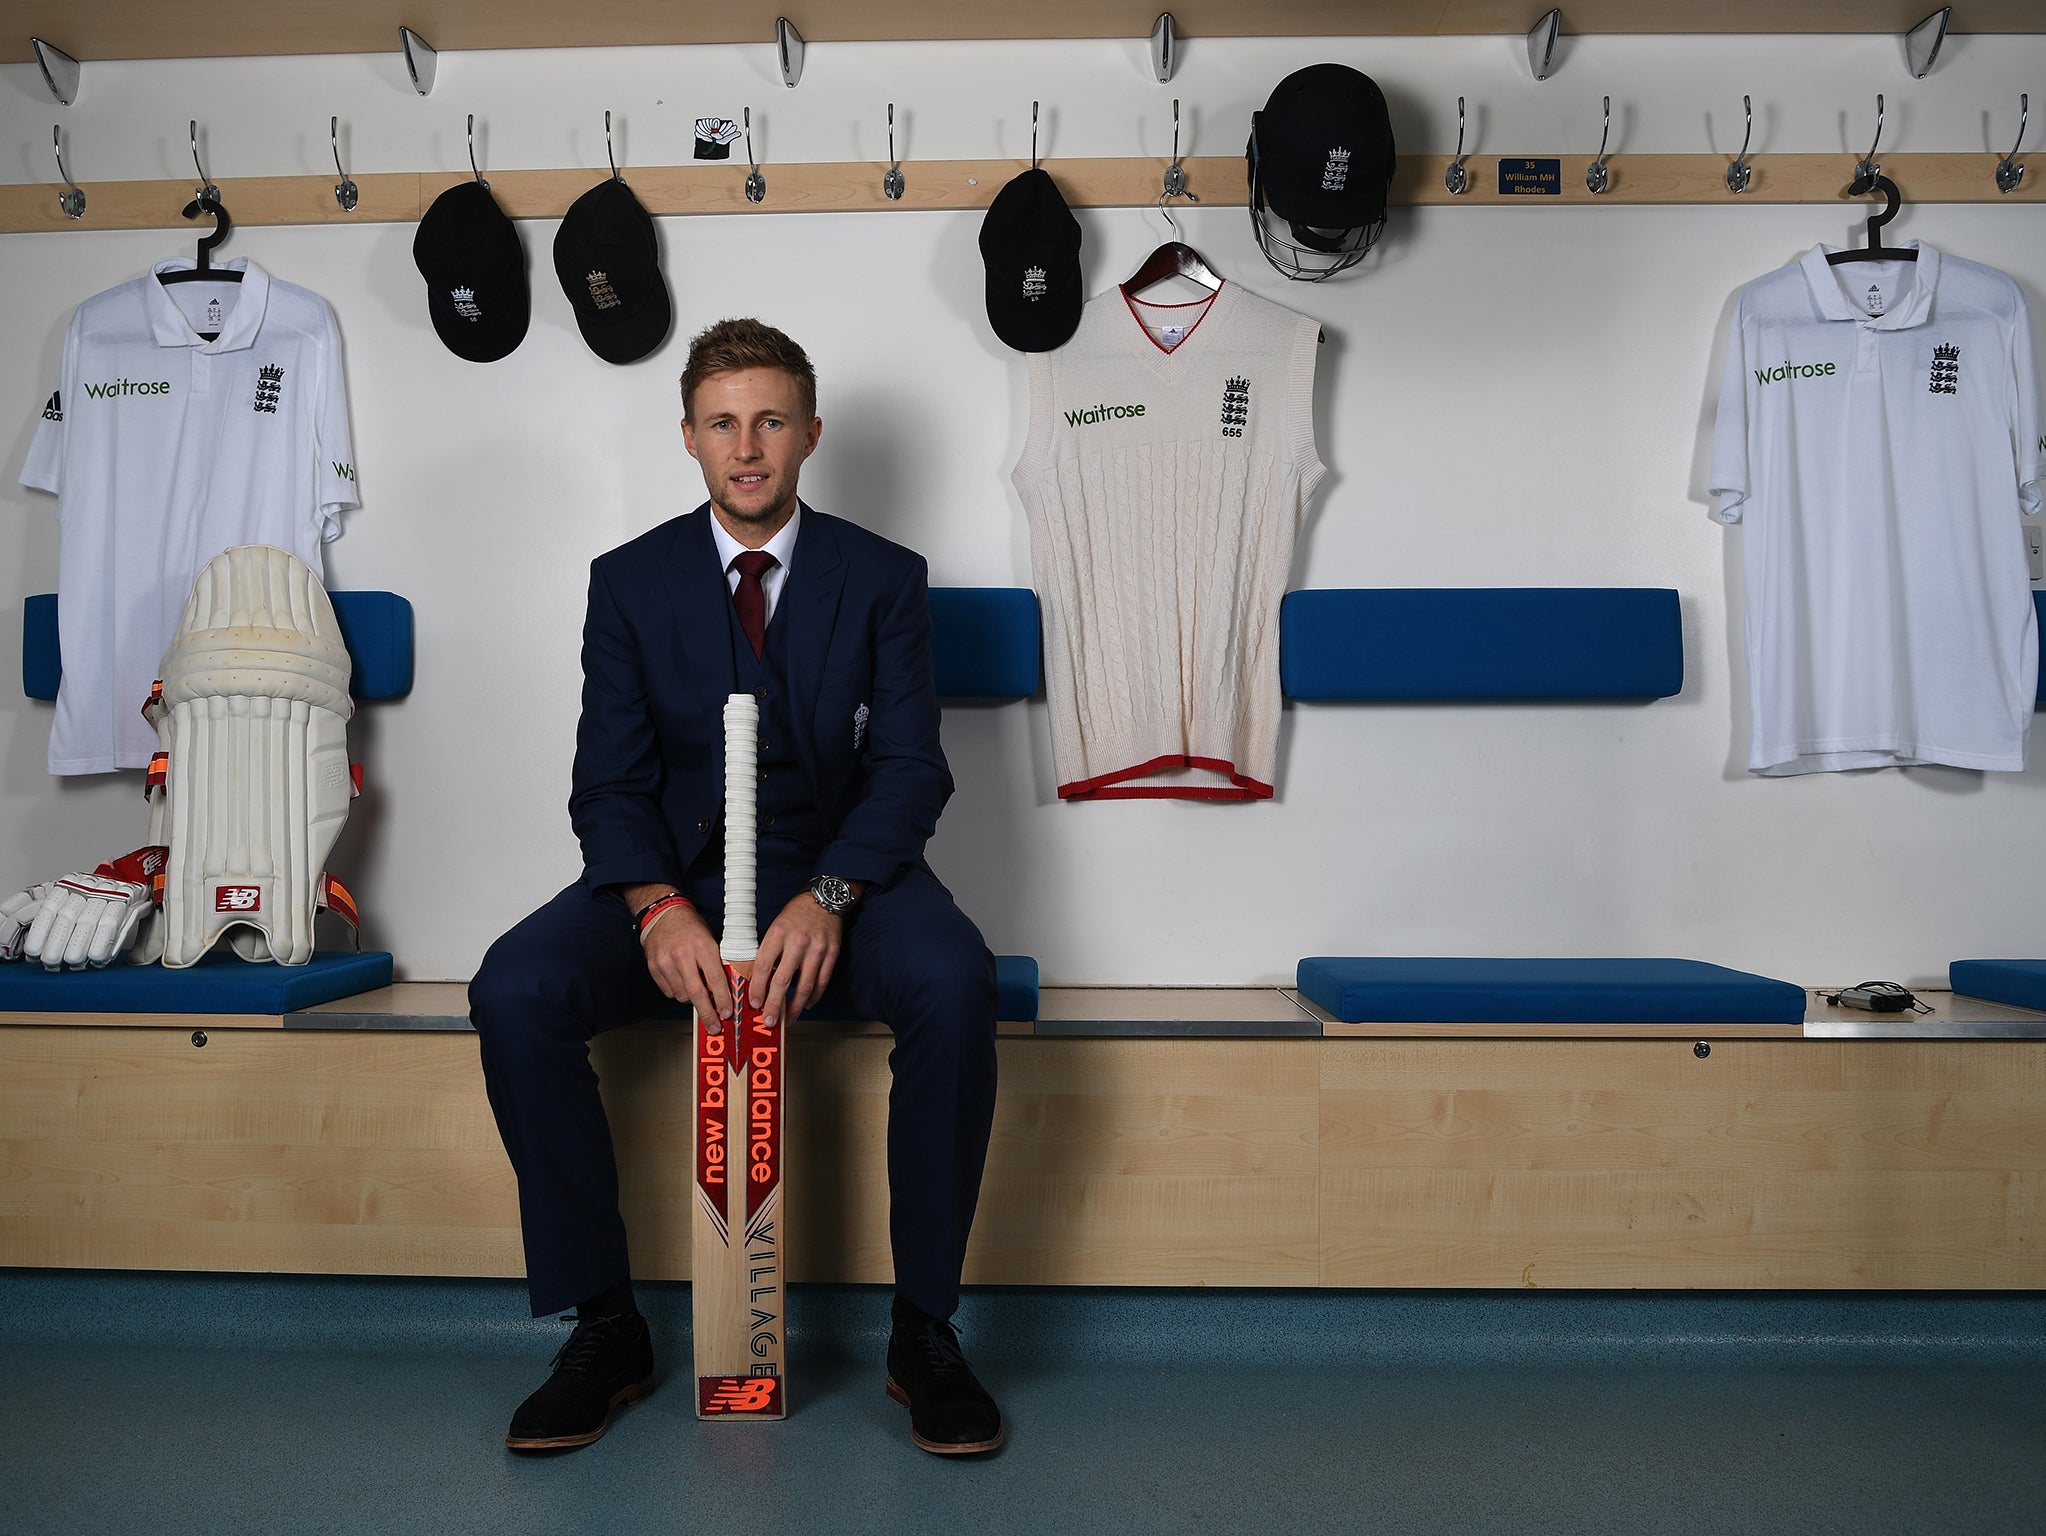 Root is happy to take on the role of villain when England head Down Under